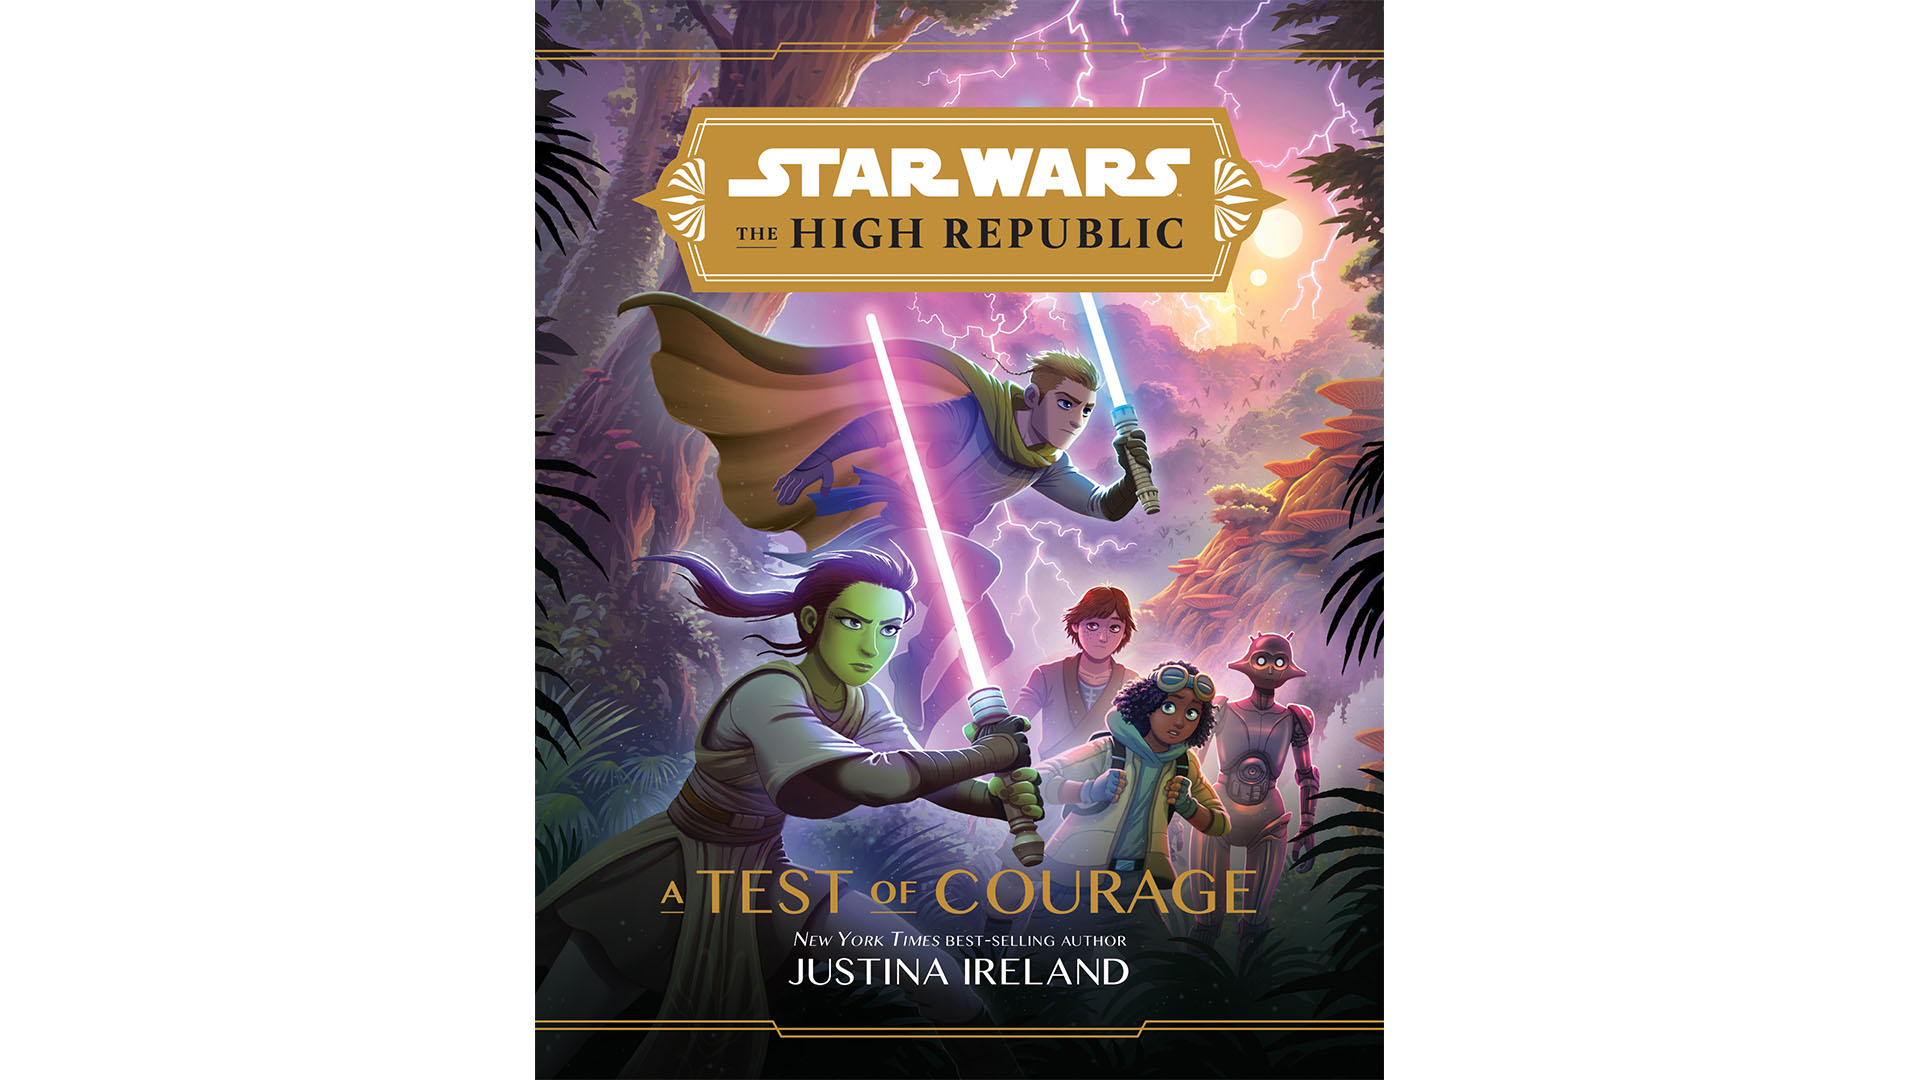 The cover of Star Wars: The High Republic: A Test of Courage, written by Justina Ireland